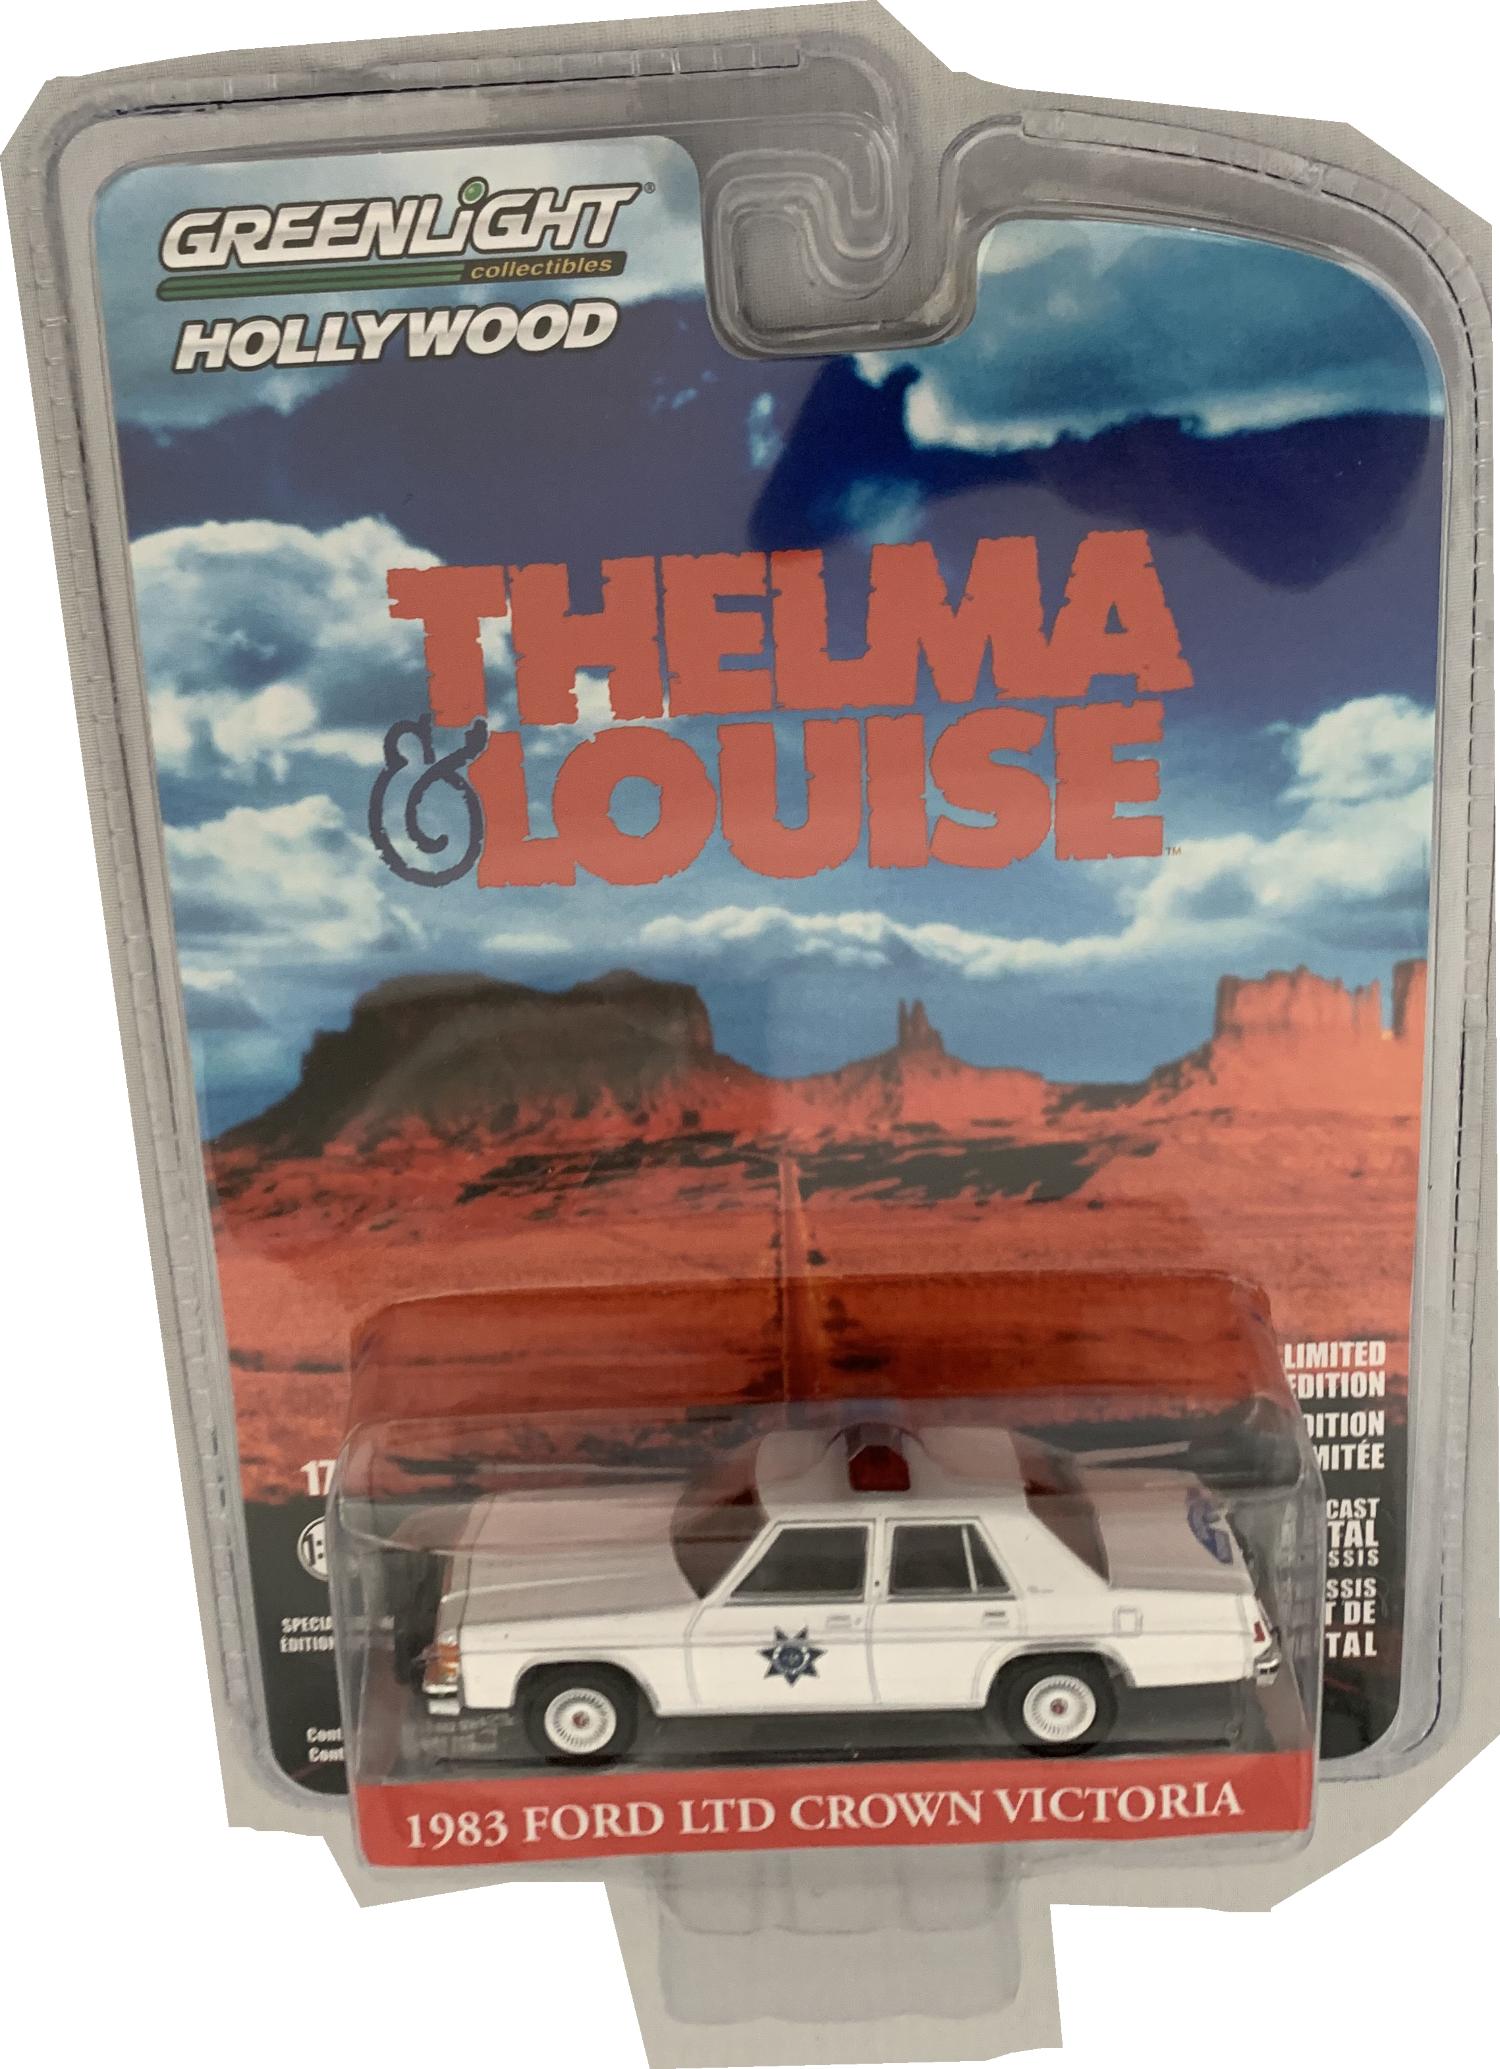 Thelma & Louise 1983 Ford Ltd Crown Victoria in white 1:64 scale model from Greenlight, limited edition model